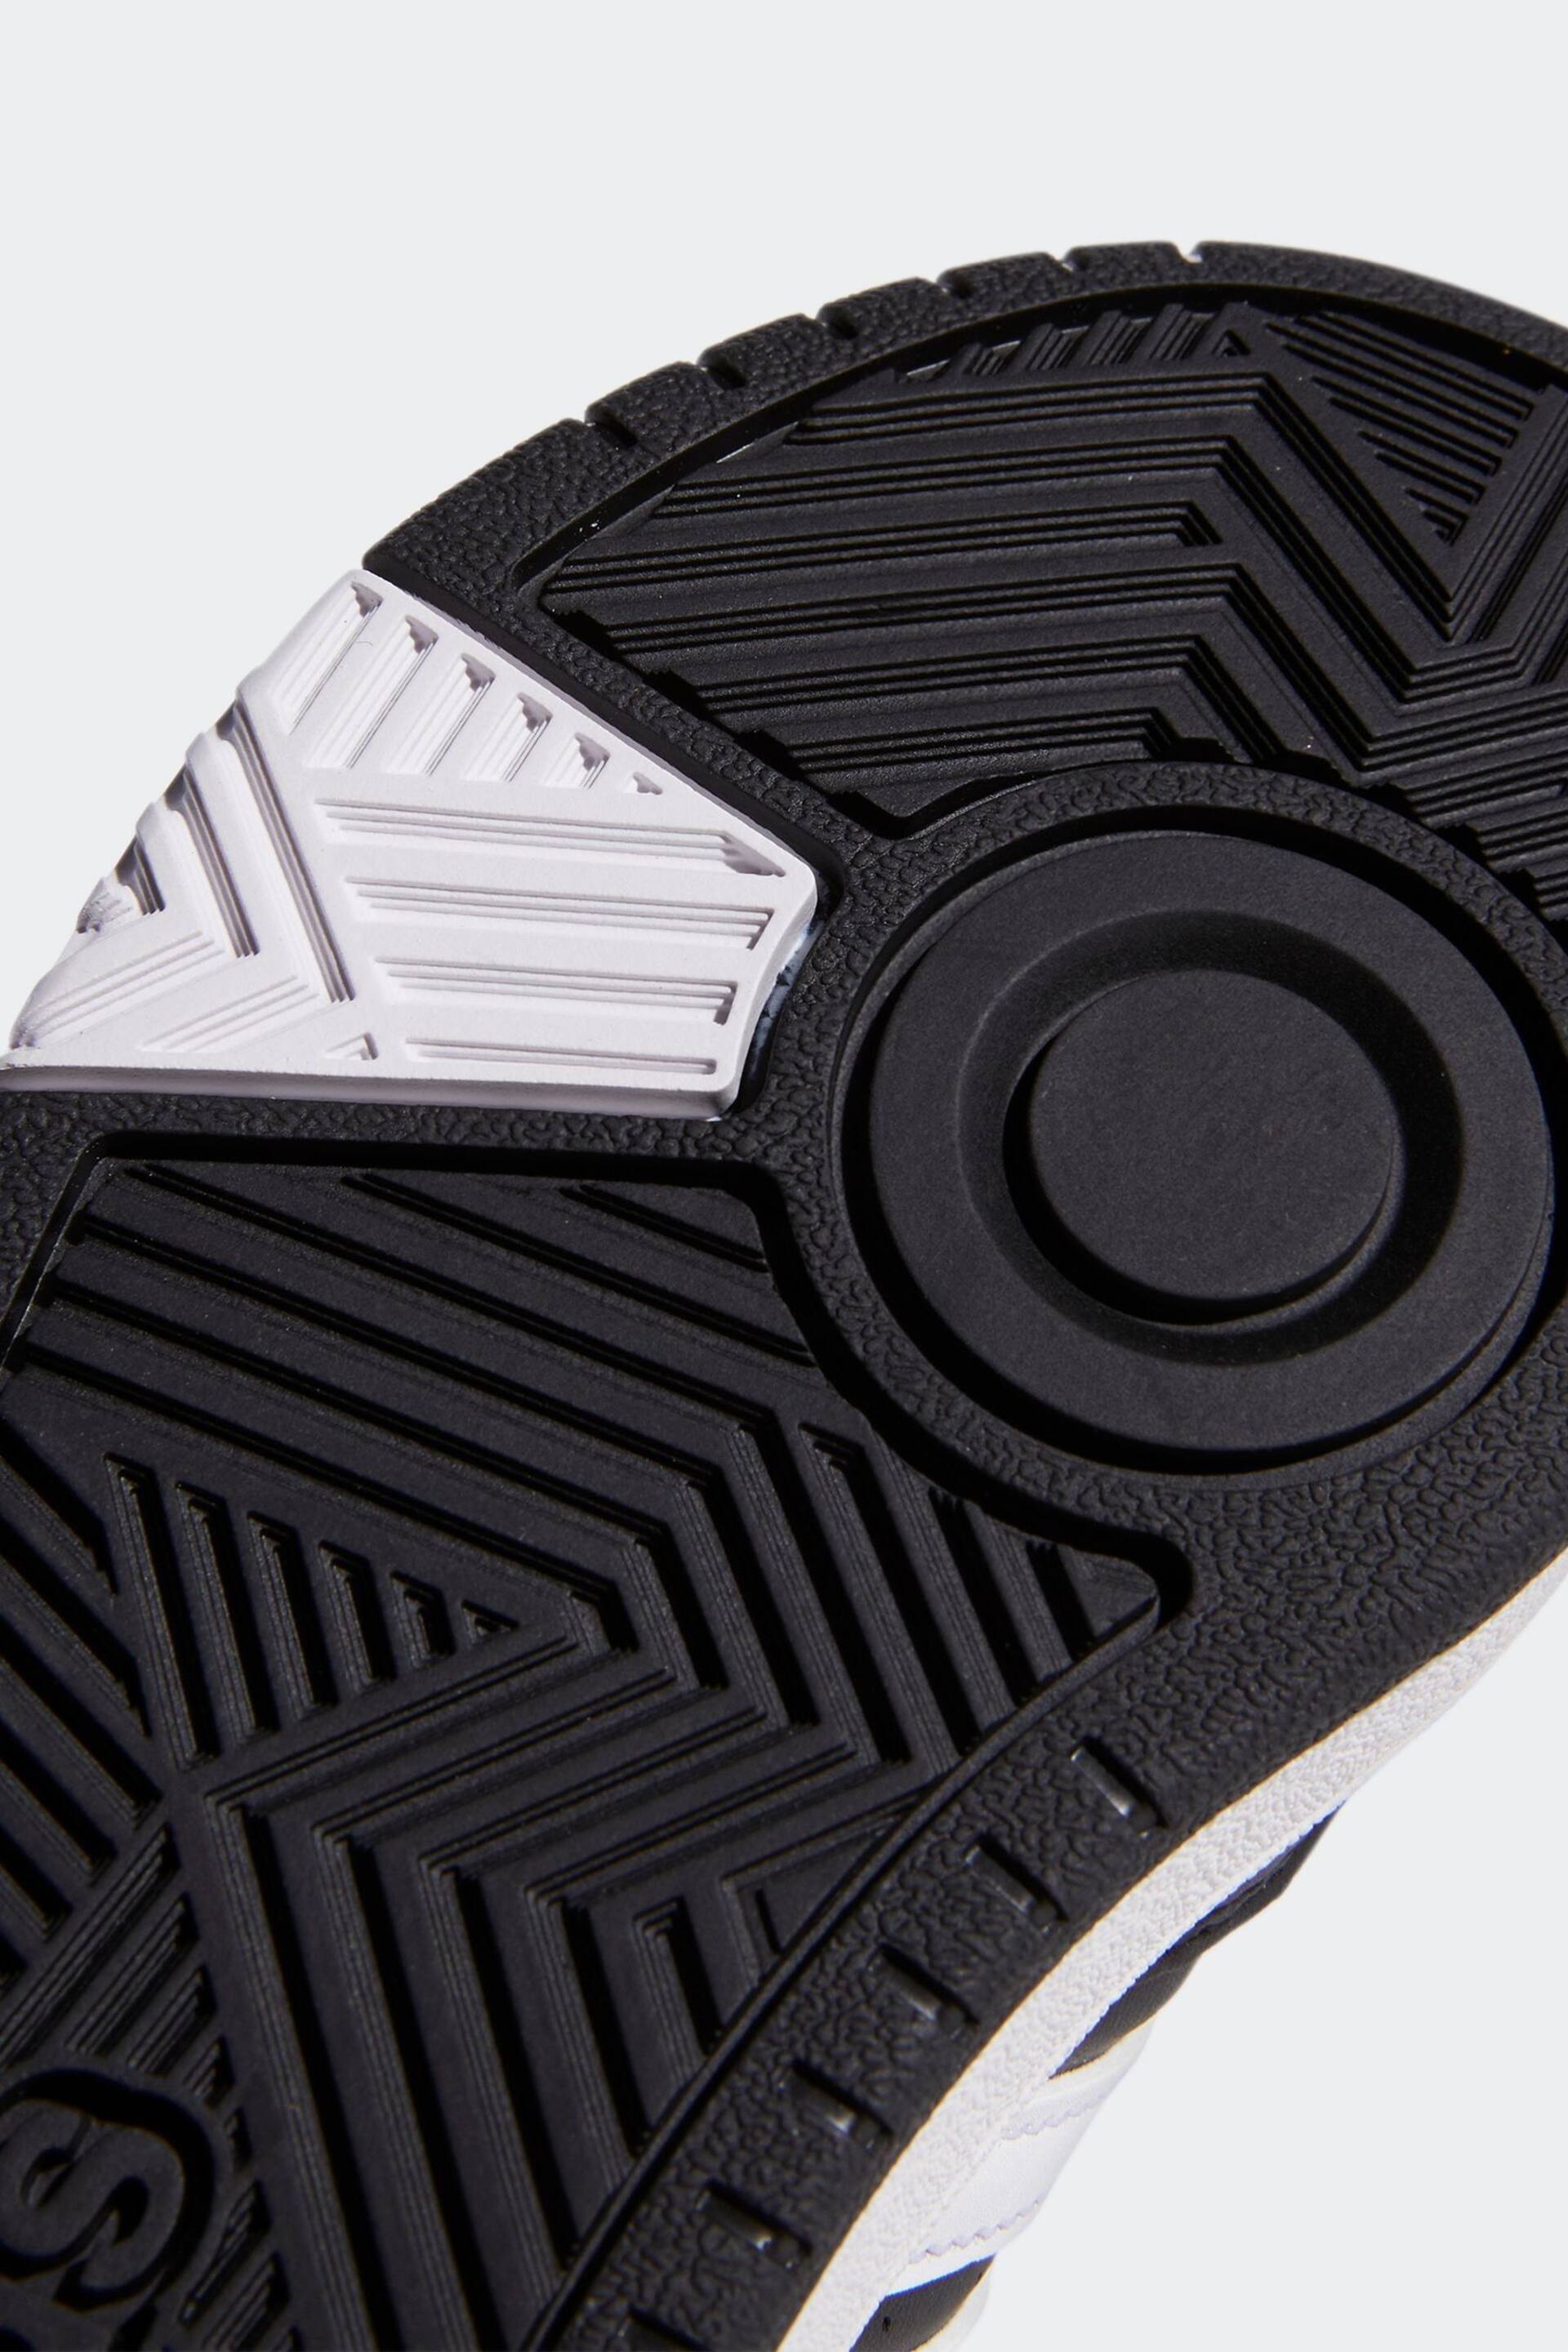 adidas Black/white Hoops Mid Shoes - Image 9 of 9